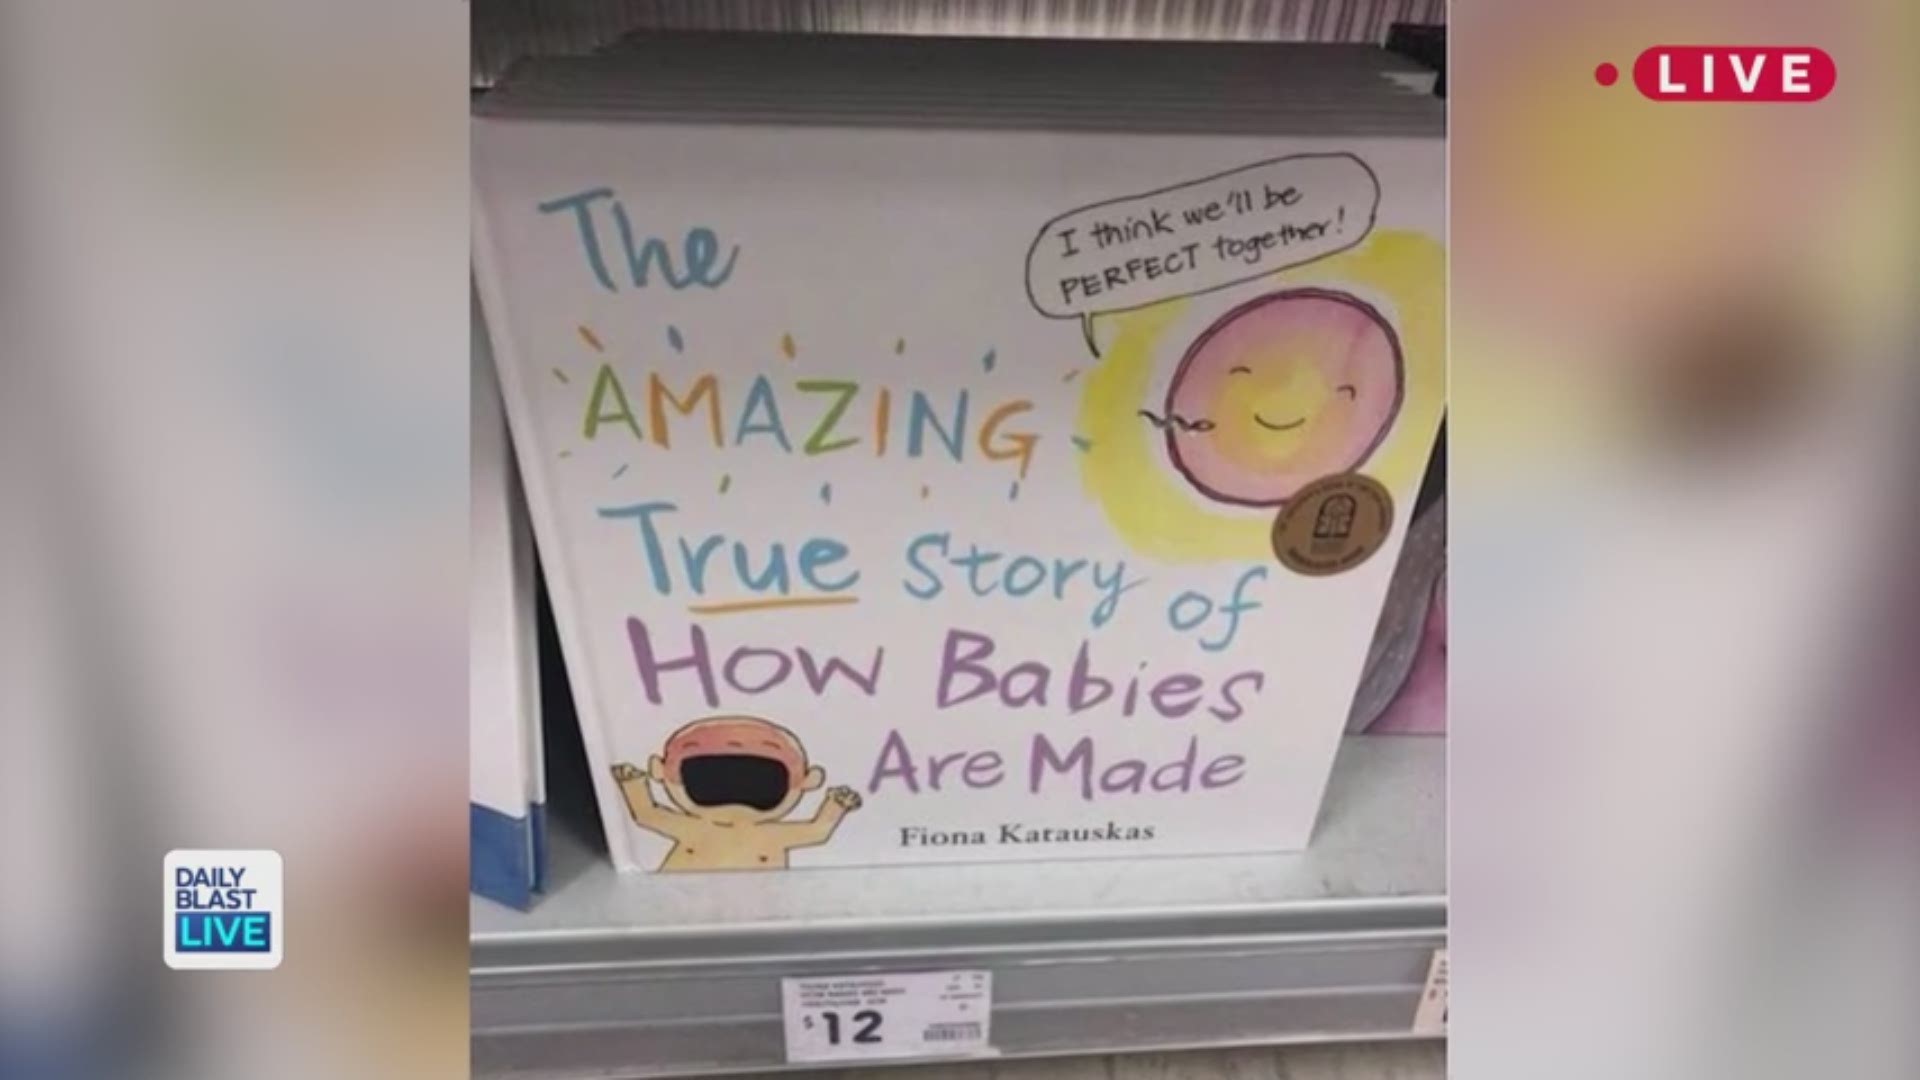 Forget the birds and the bees, a new children's sex-education book is creating a lot of buzz online for being too inappropriate. The book includes photos that demonstrate how babies are actually made with detailed drawings of reproductive systems. Daily B